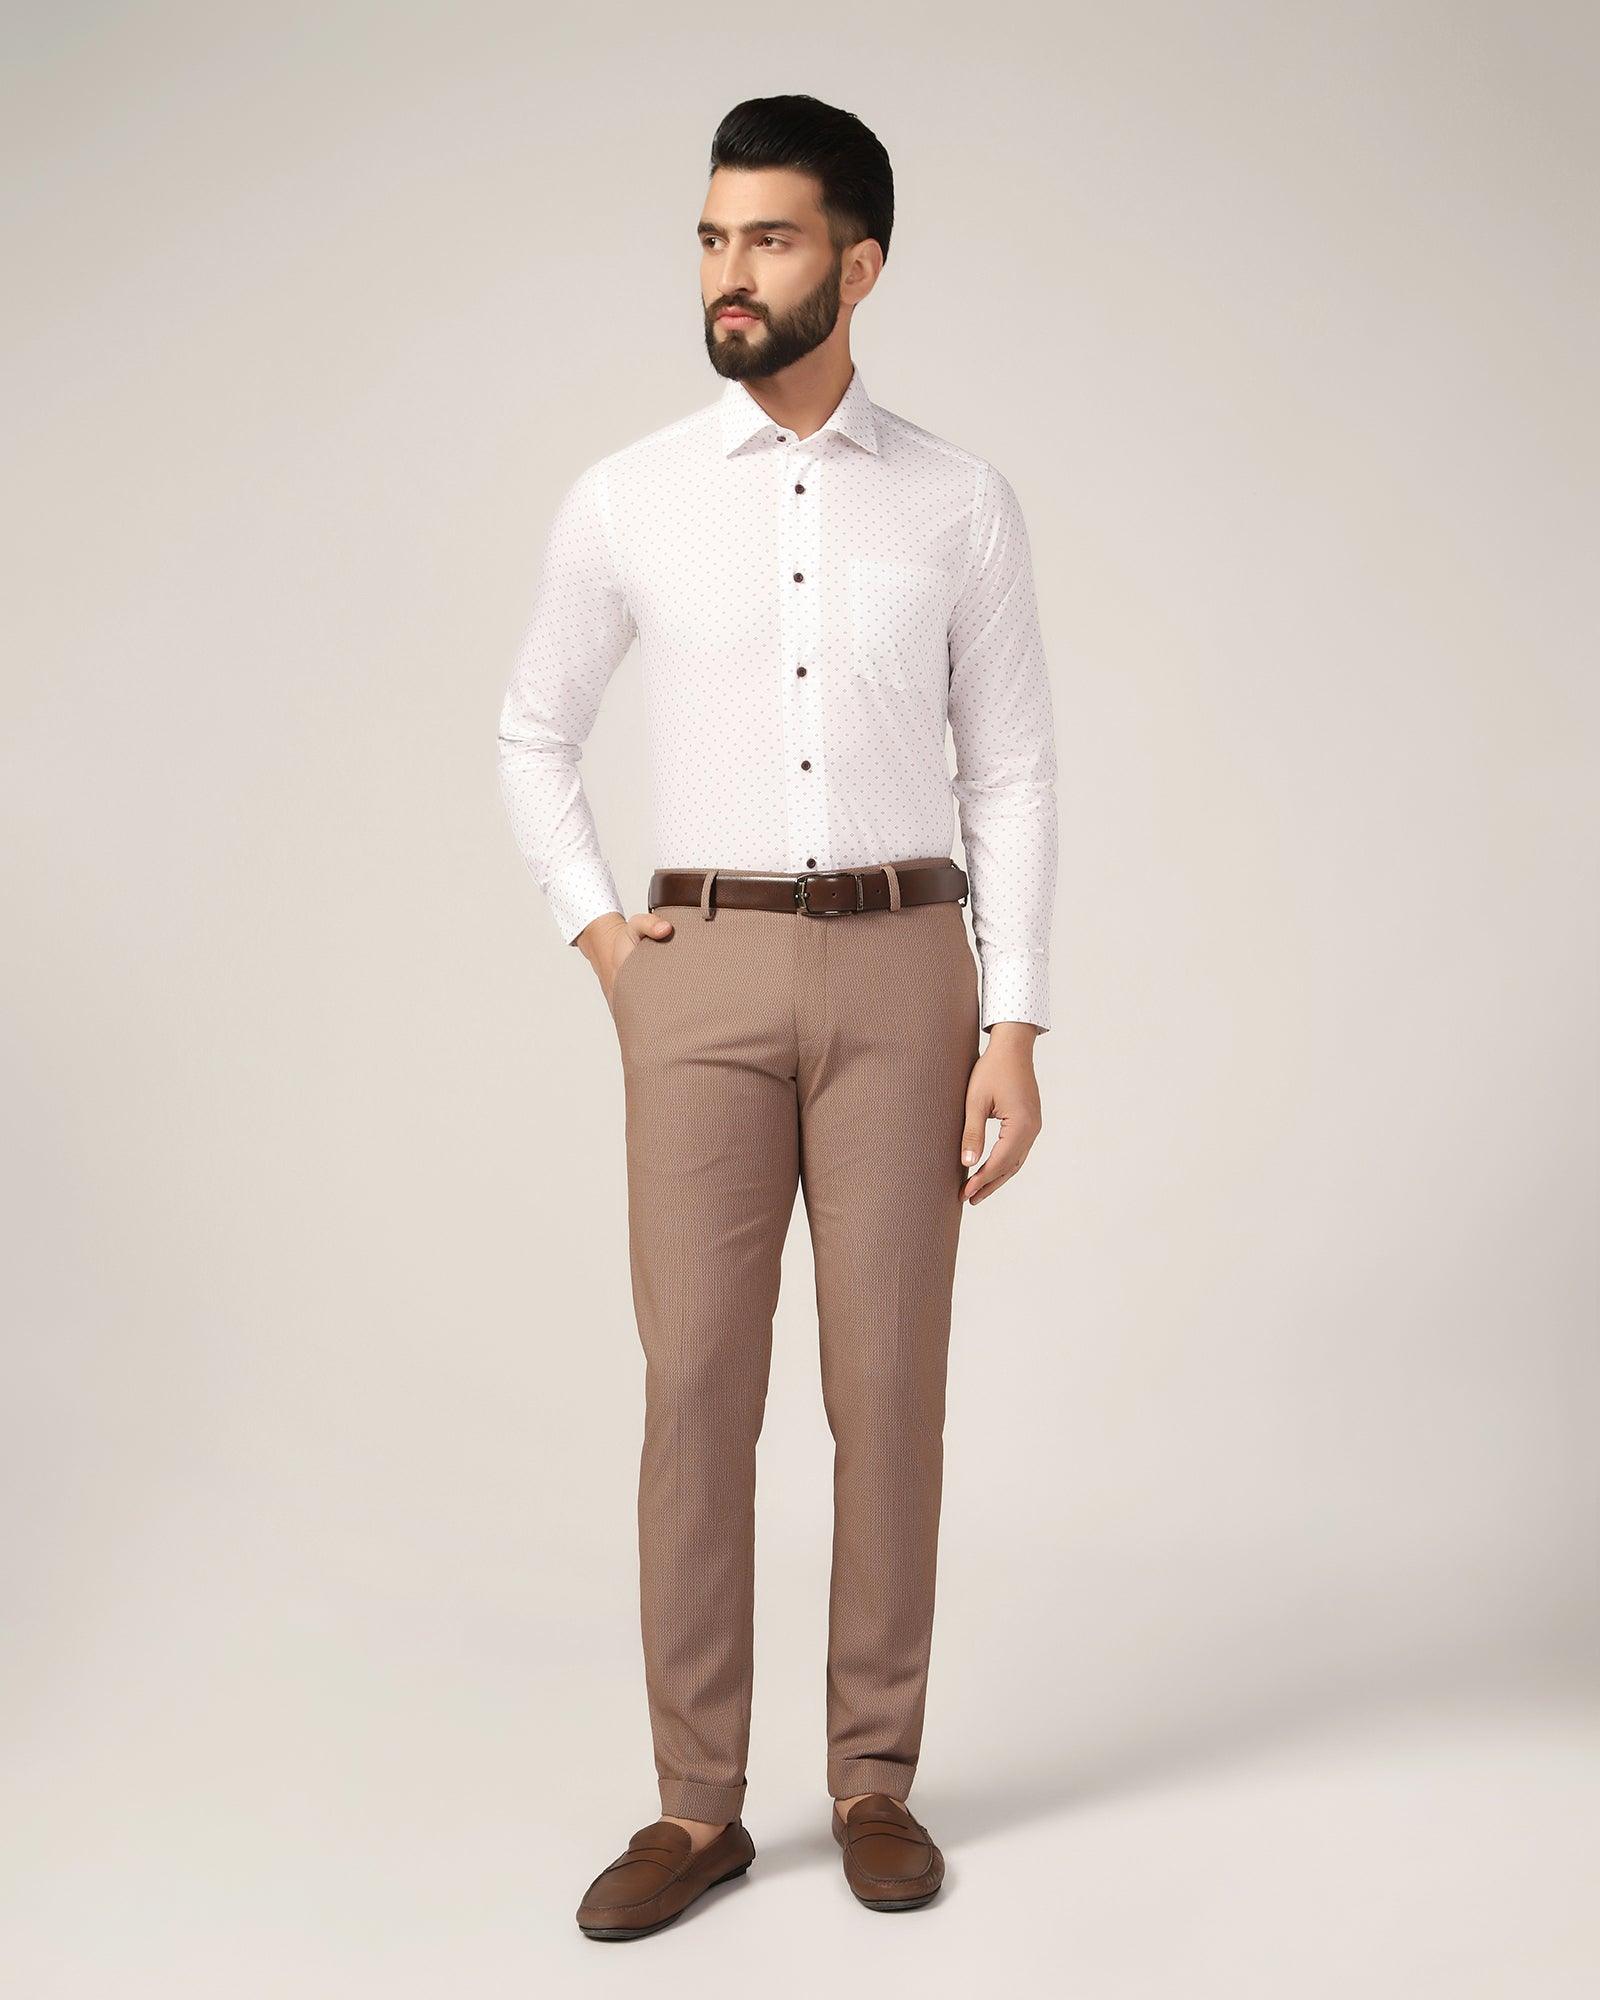 Phoenix Pleated Formal Brown Textured Trouser - Trident